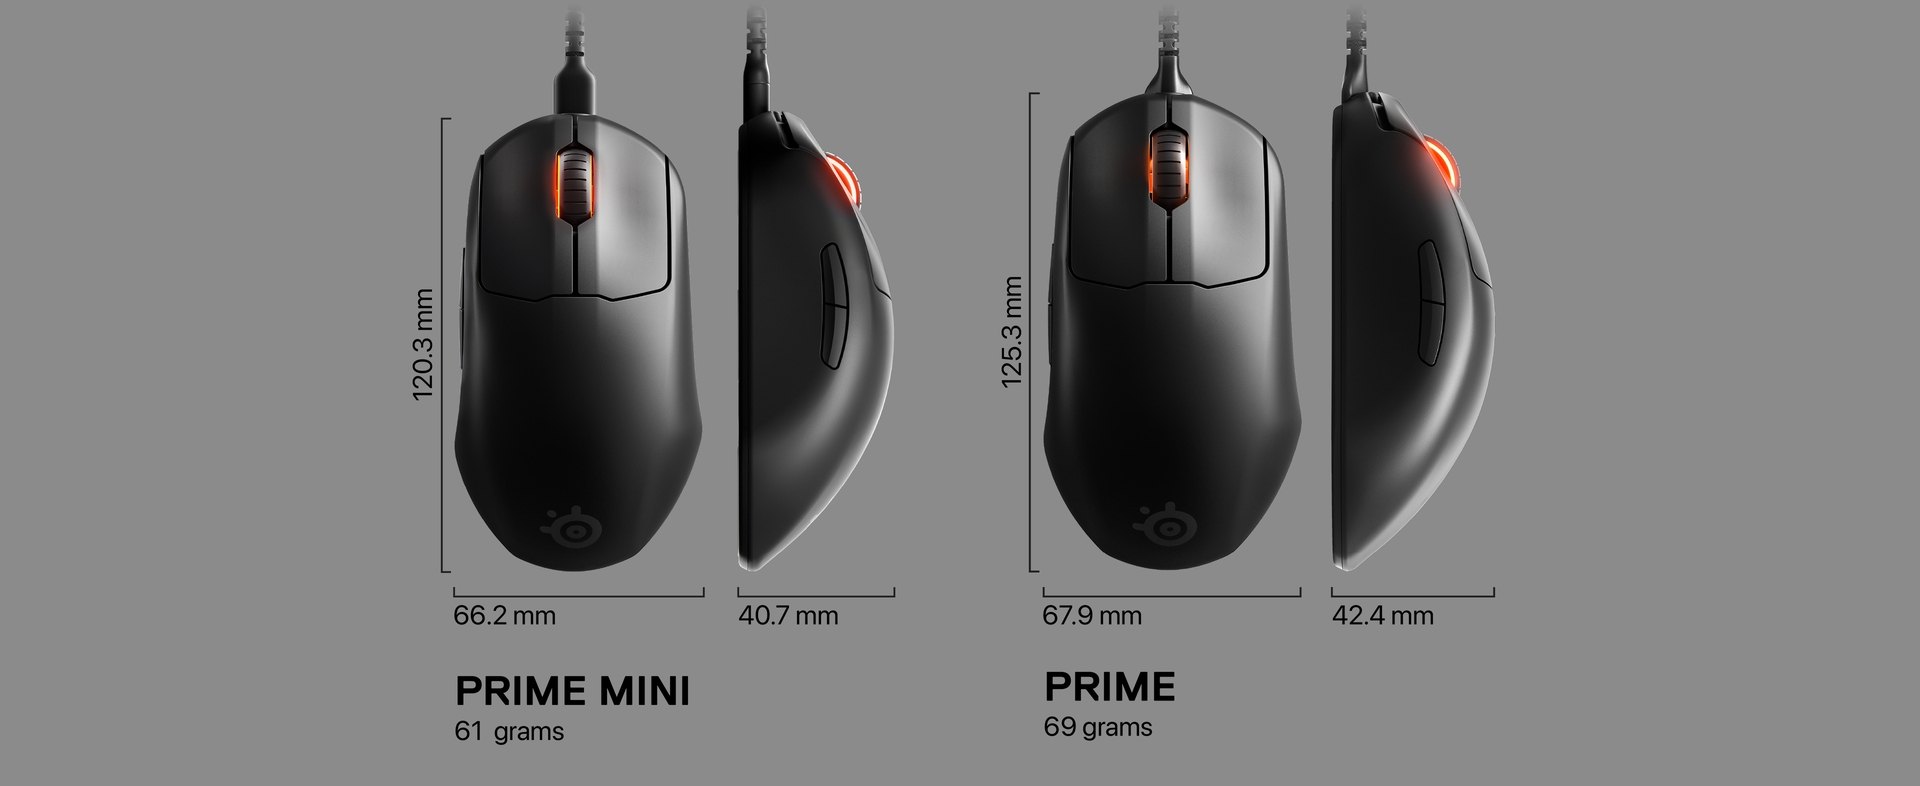 A diagram showing the size difference between the Prime and Prime Mini. Text left: Prime Mini, 61 grams. Text right: Prime 69 grams.